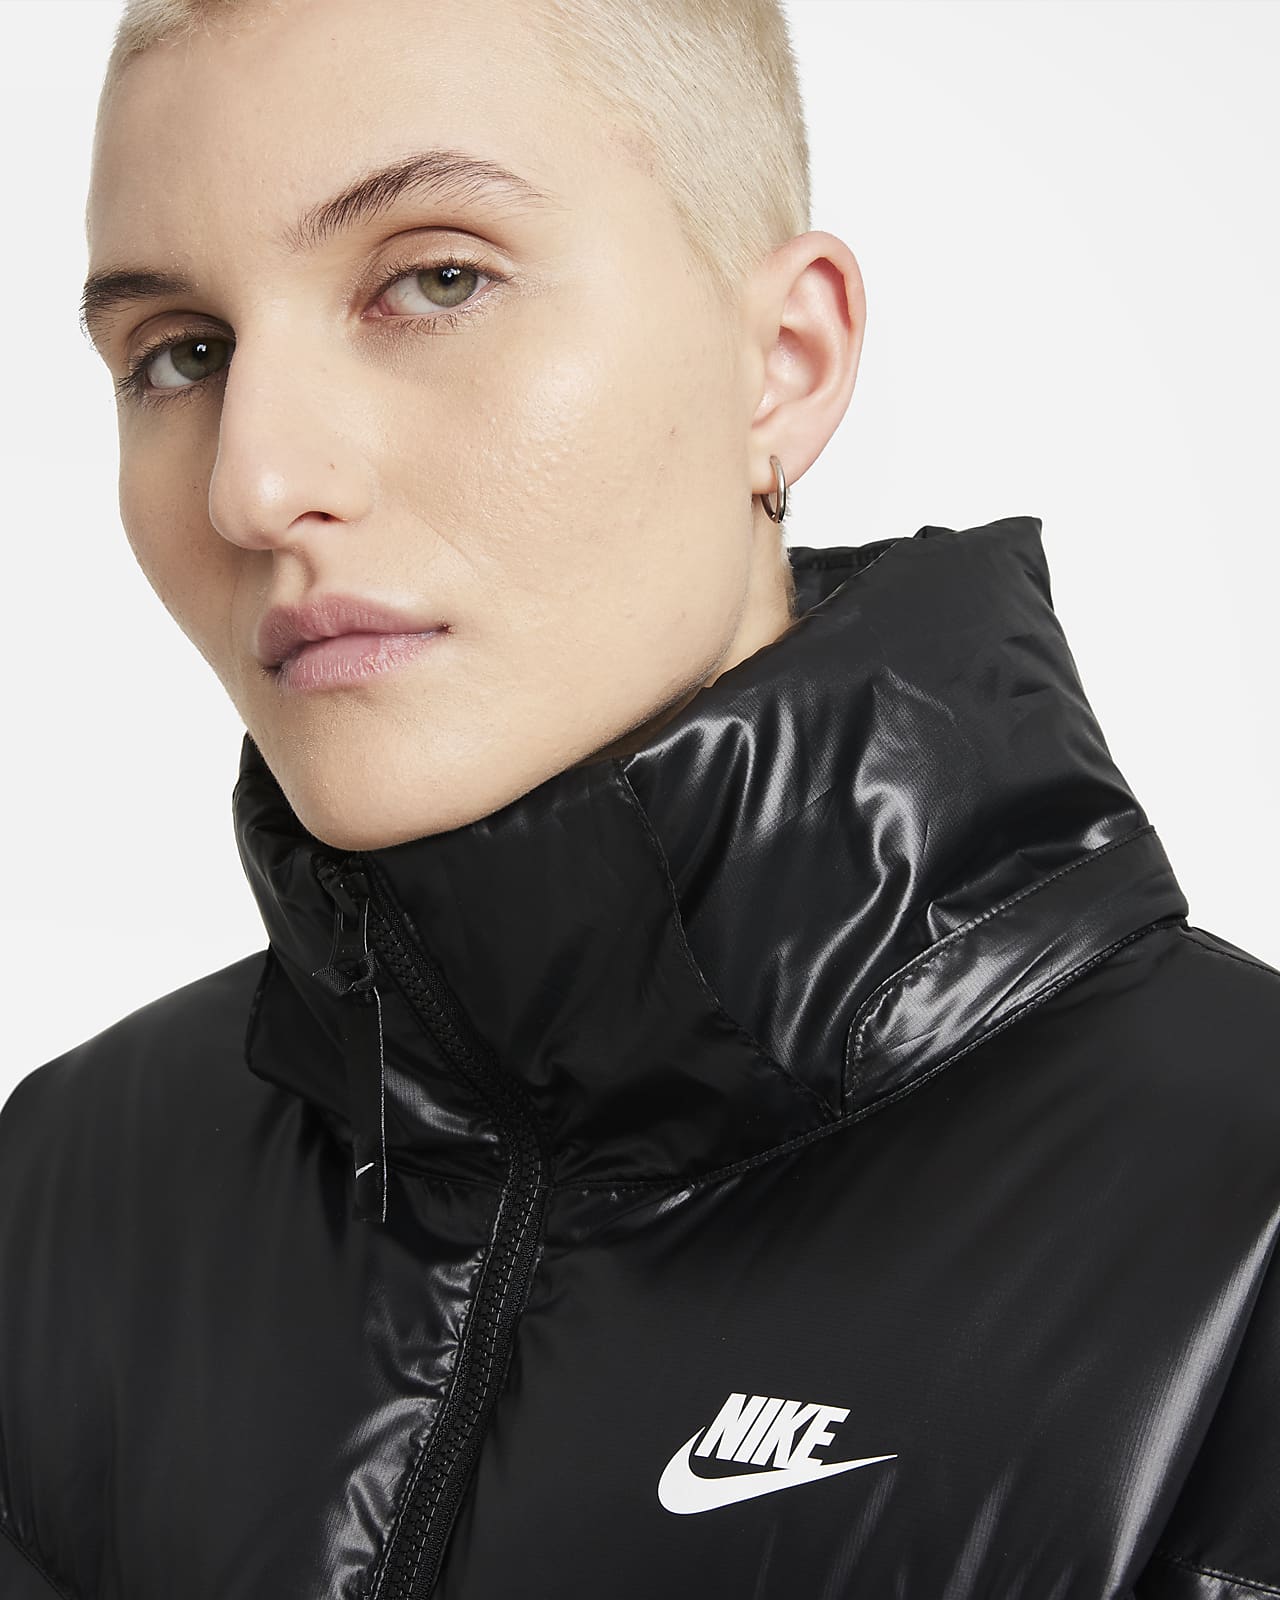 Casaco com capuz Nike Sportswear Therma-FIT Repel Women s Hooded Parka 